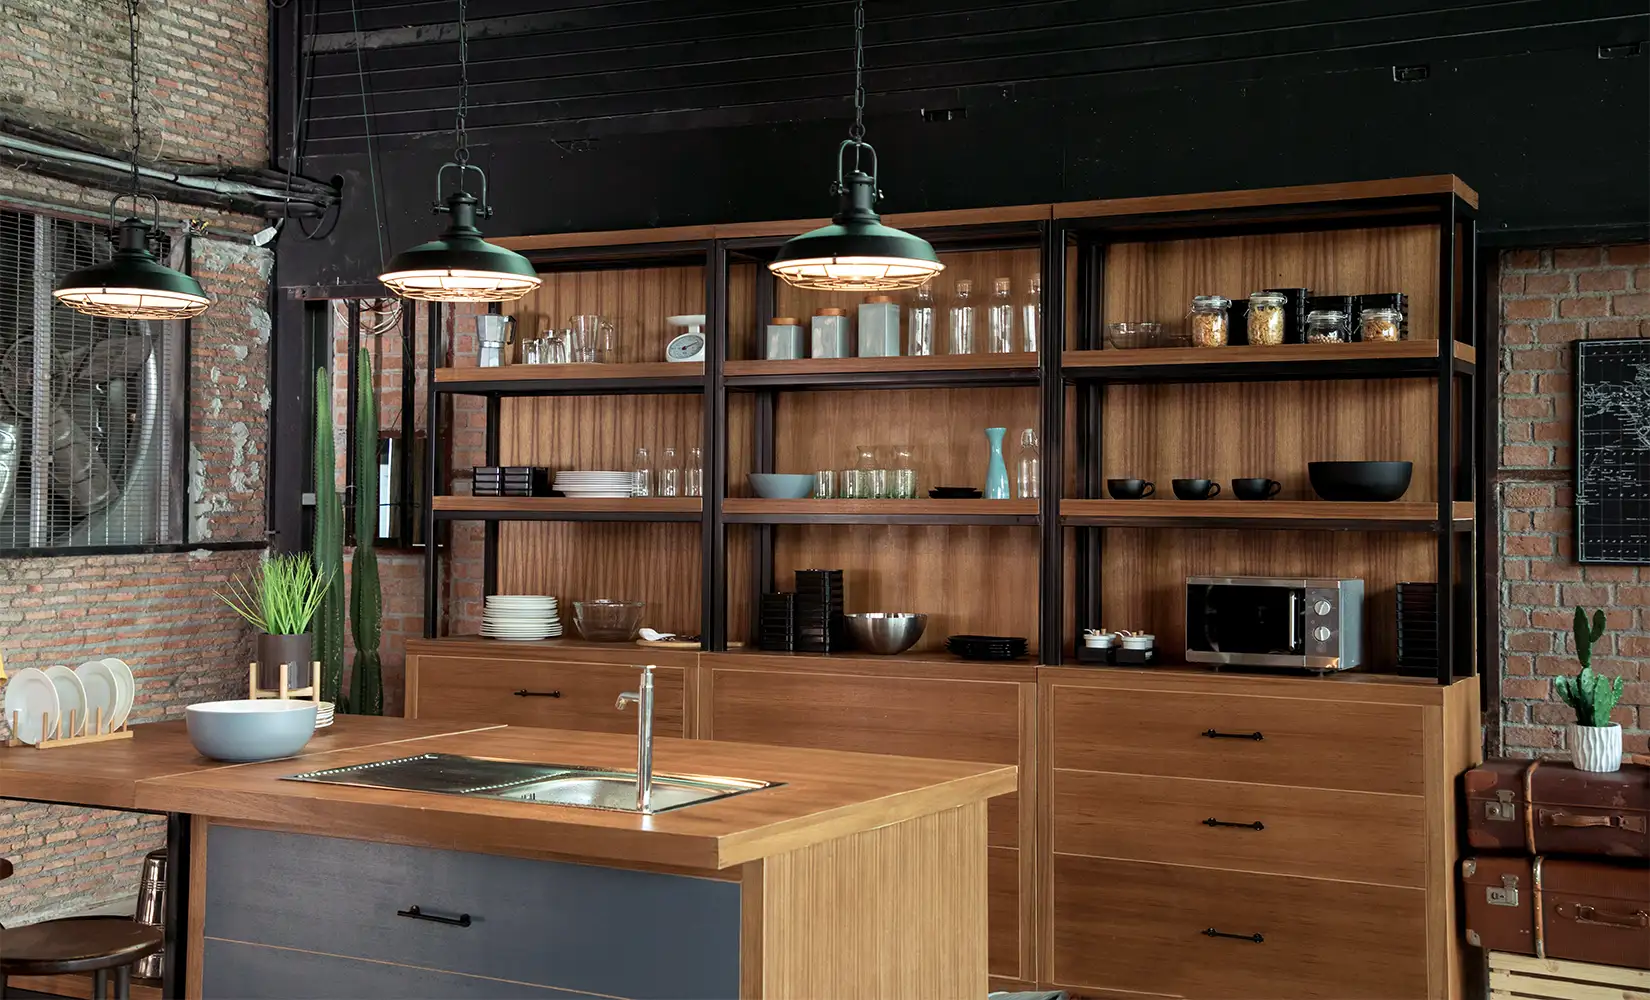 Modern industrial kitchen with hanging light fixtures, wooden shelving, and industrial kitchen decor.